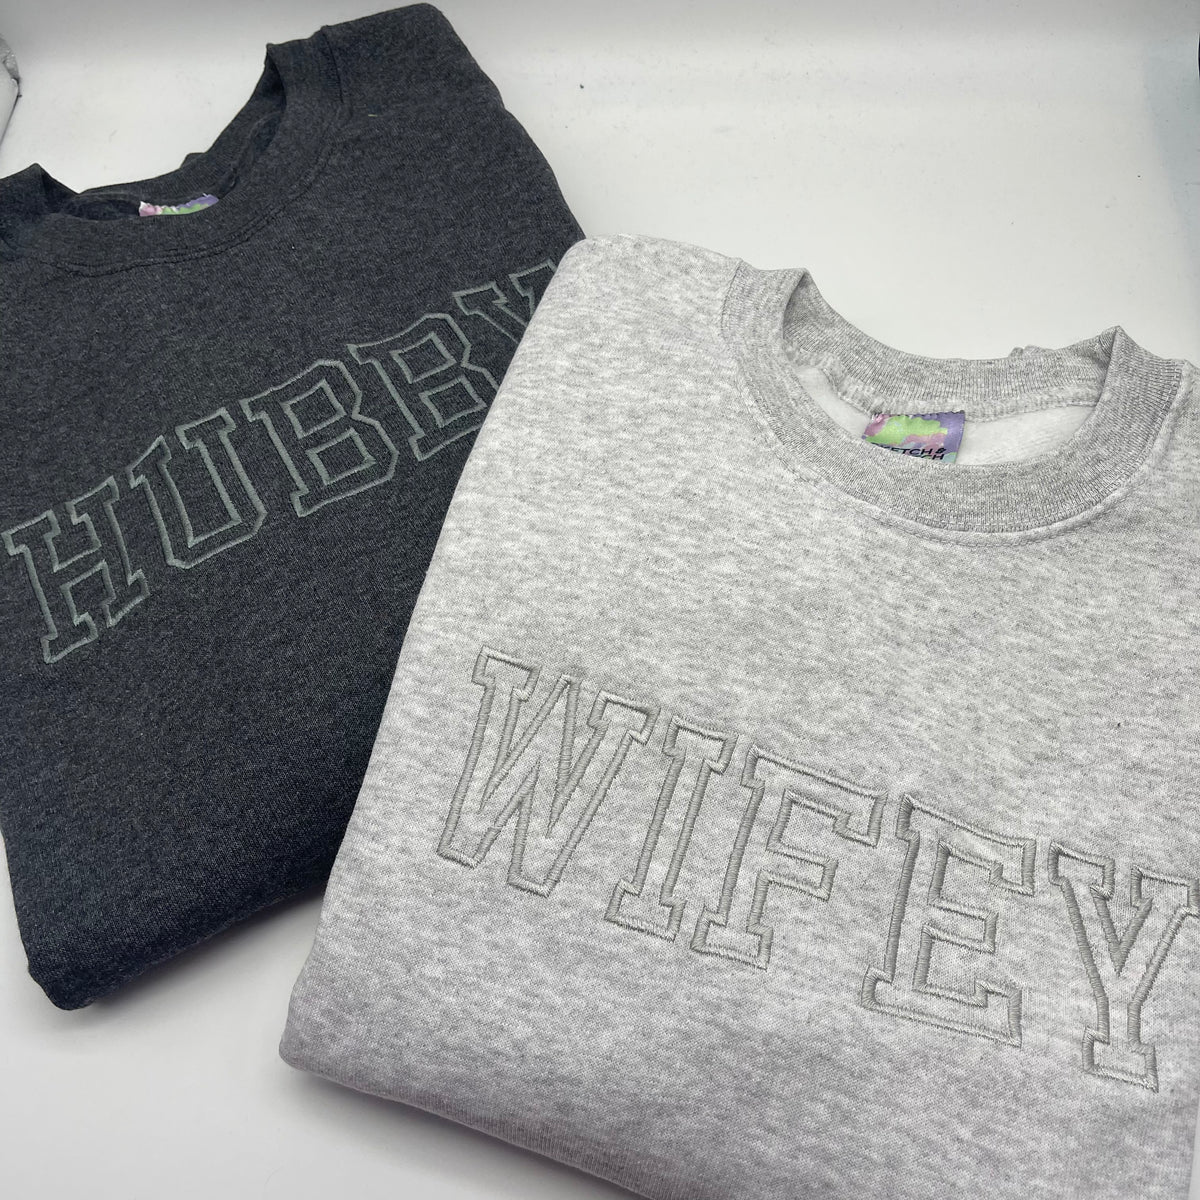 Matching Wifey and Hubby Personalised Sweatshirts. Personalised Text Sweatshirt. Personalized birthday gifts, personalised embroidered sweatshirts, personalised gifts.